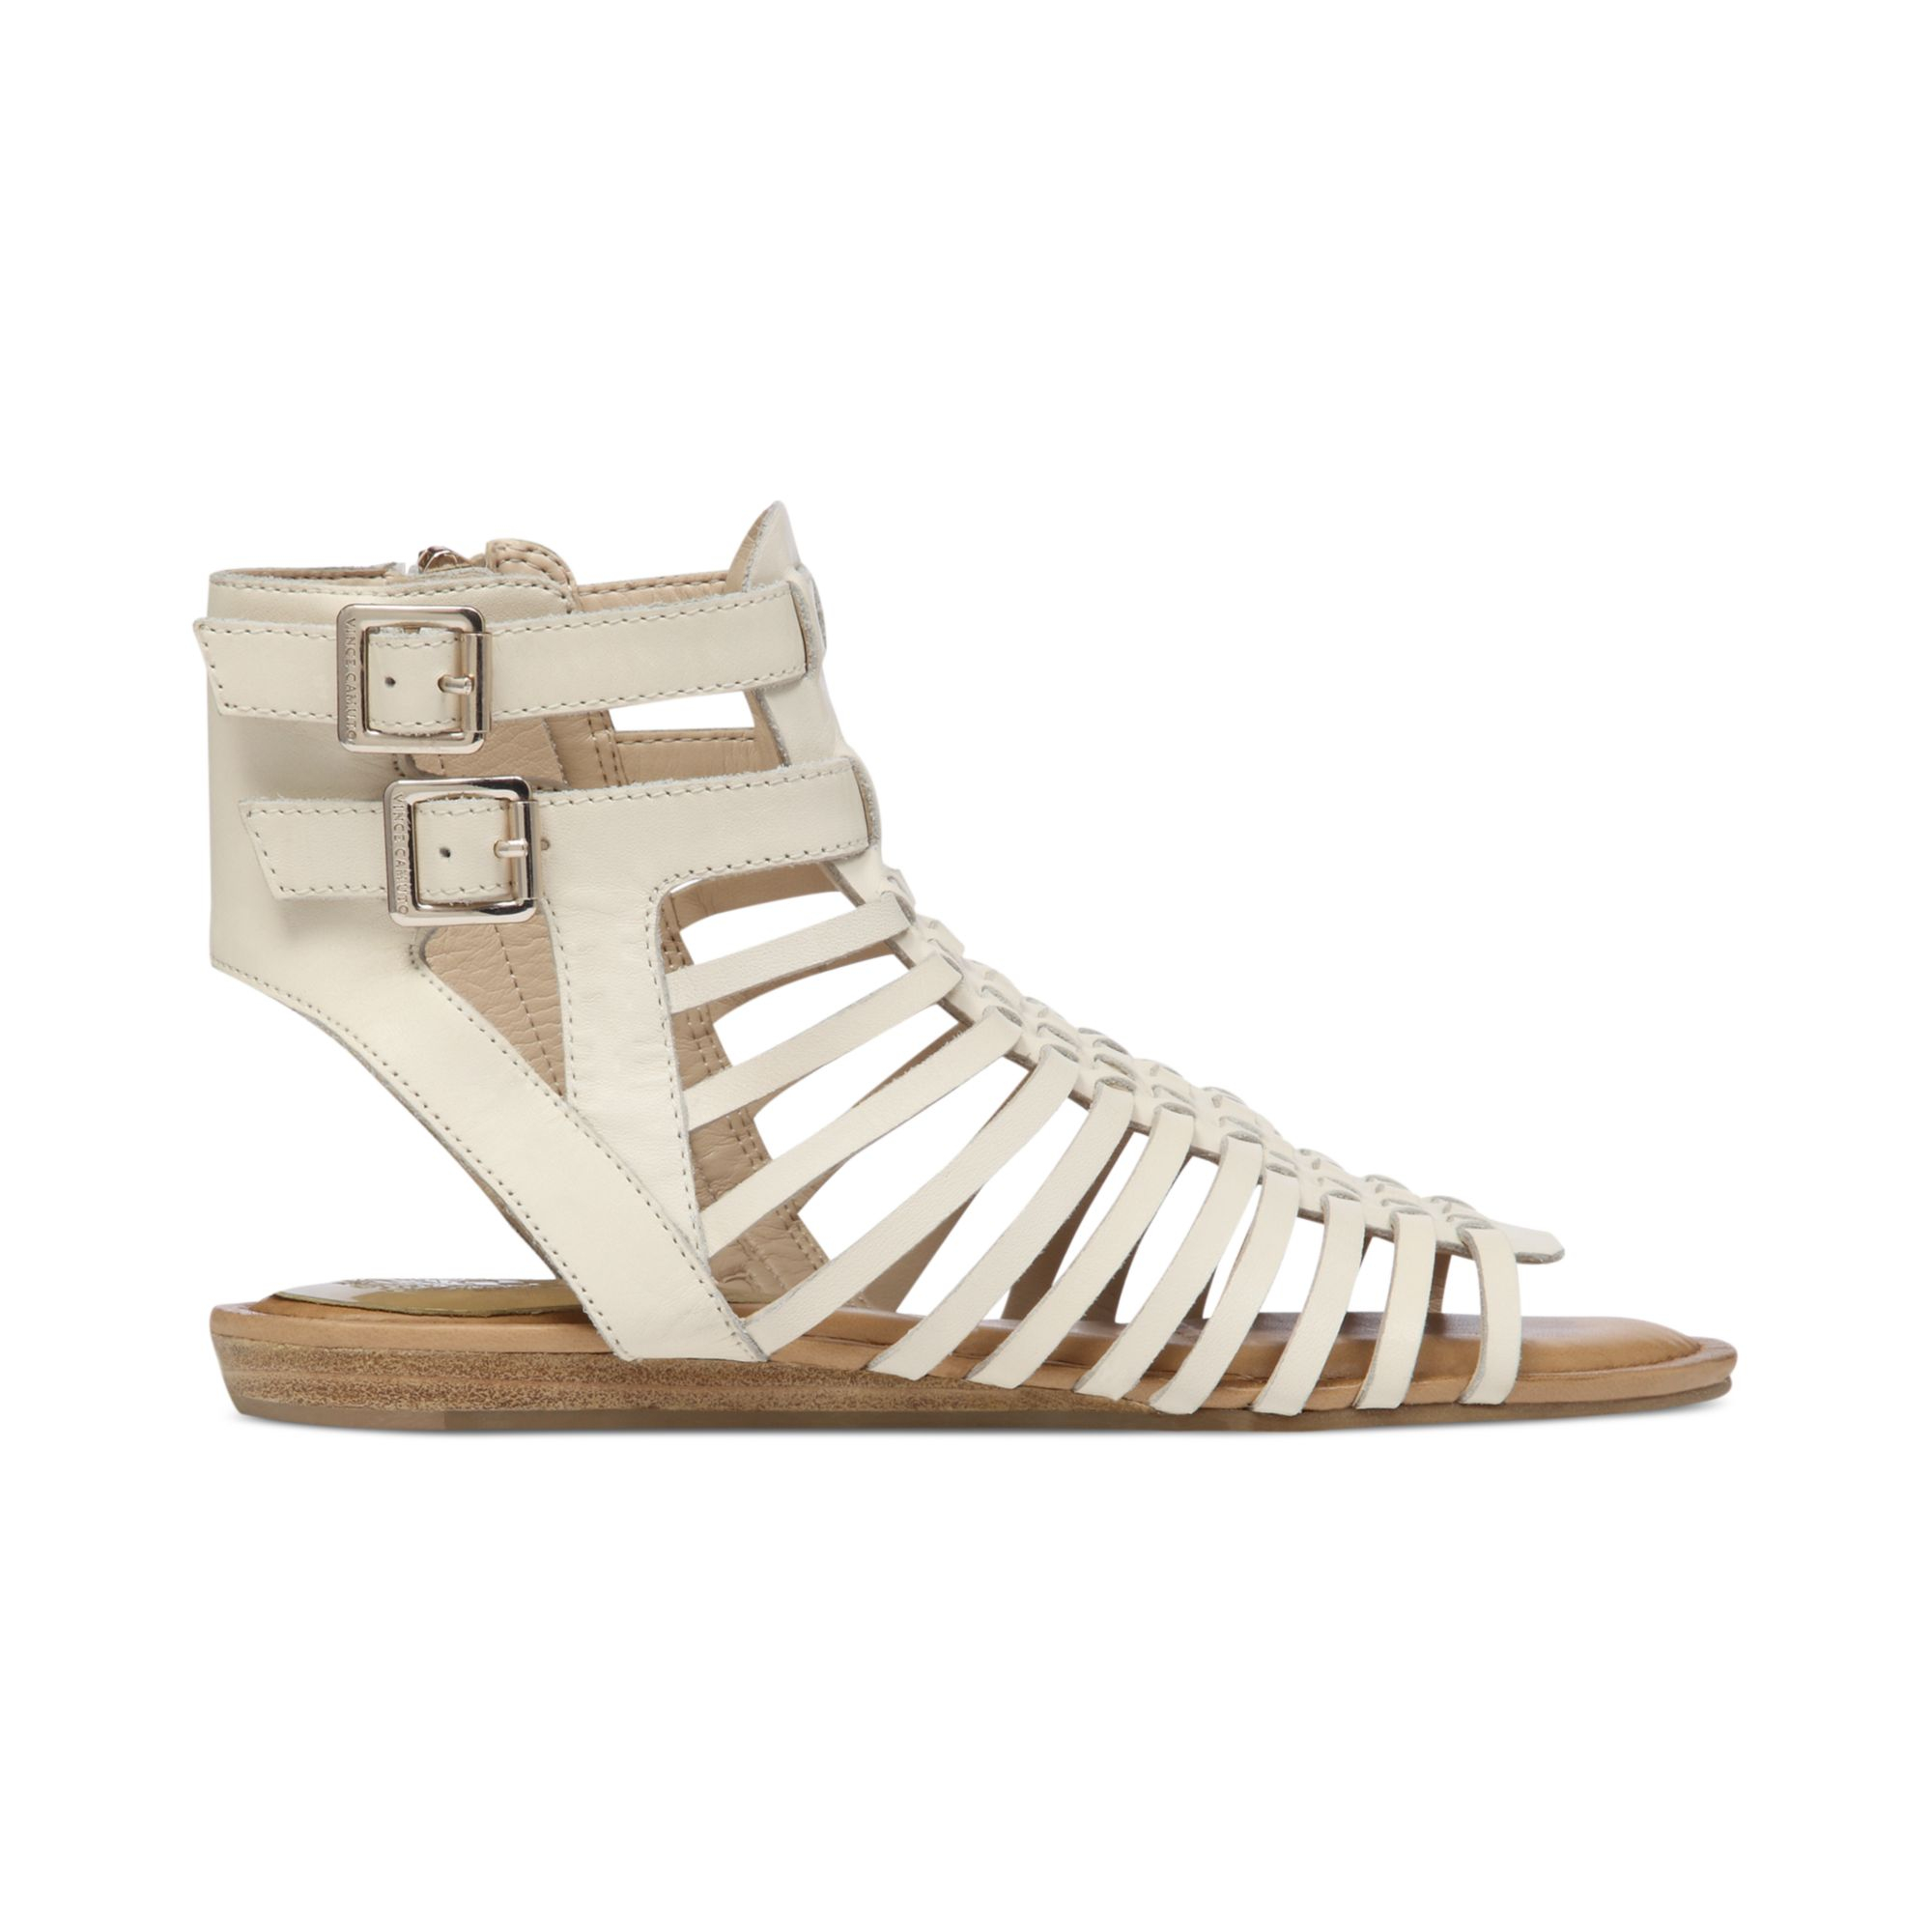 Vince Camuto Kensil Gladiator Sandals in White | Lyst